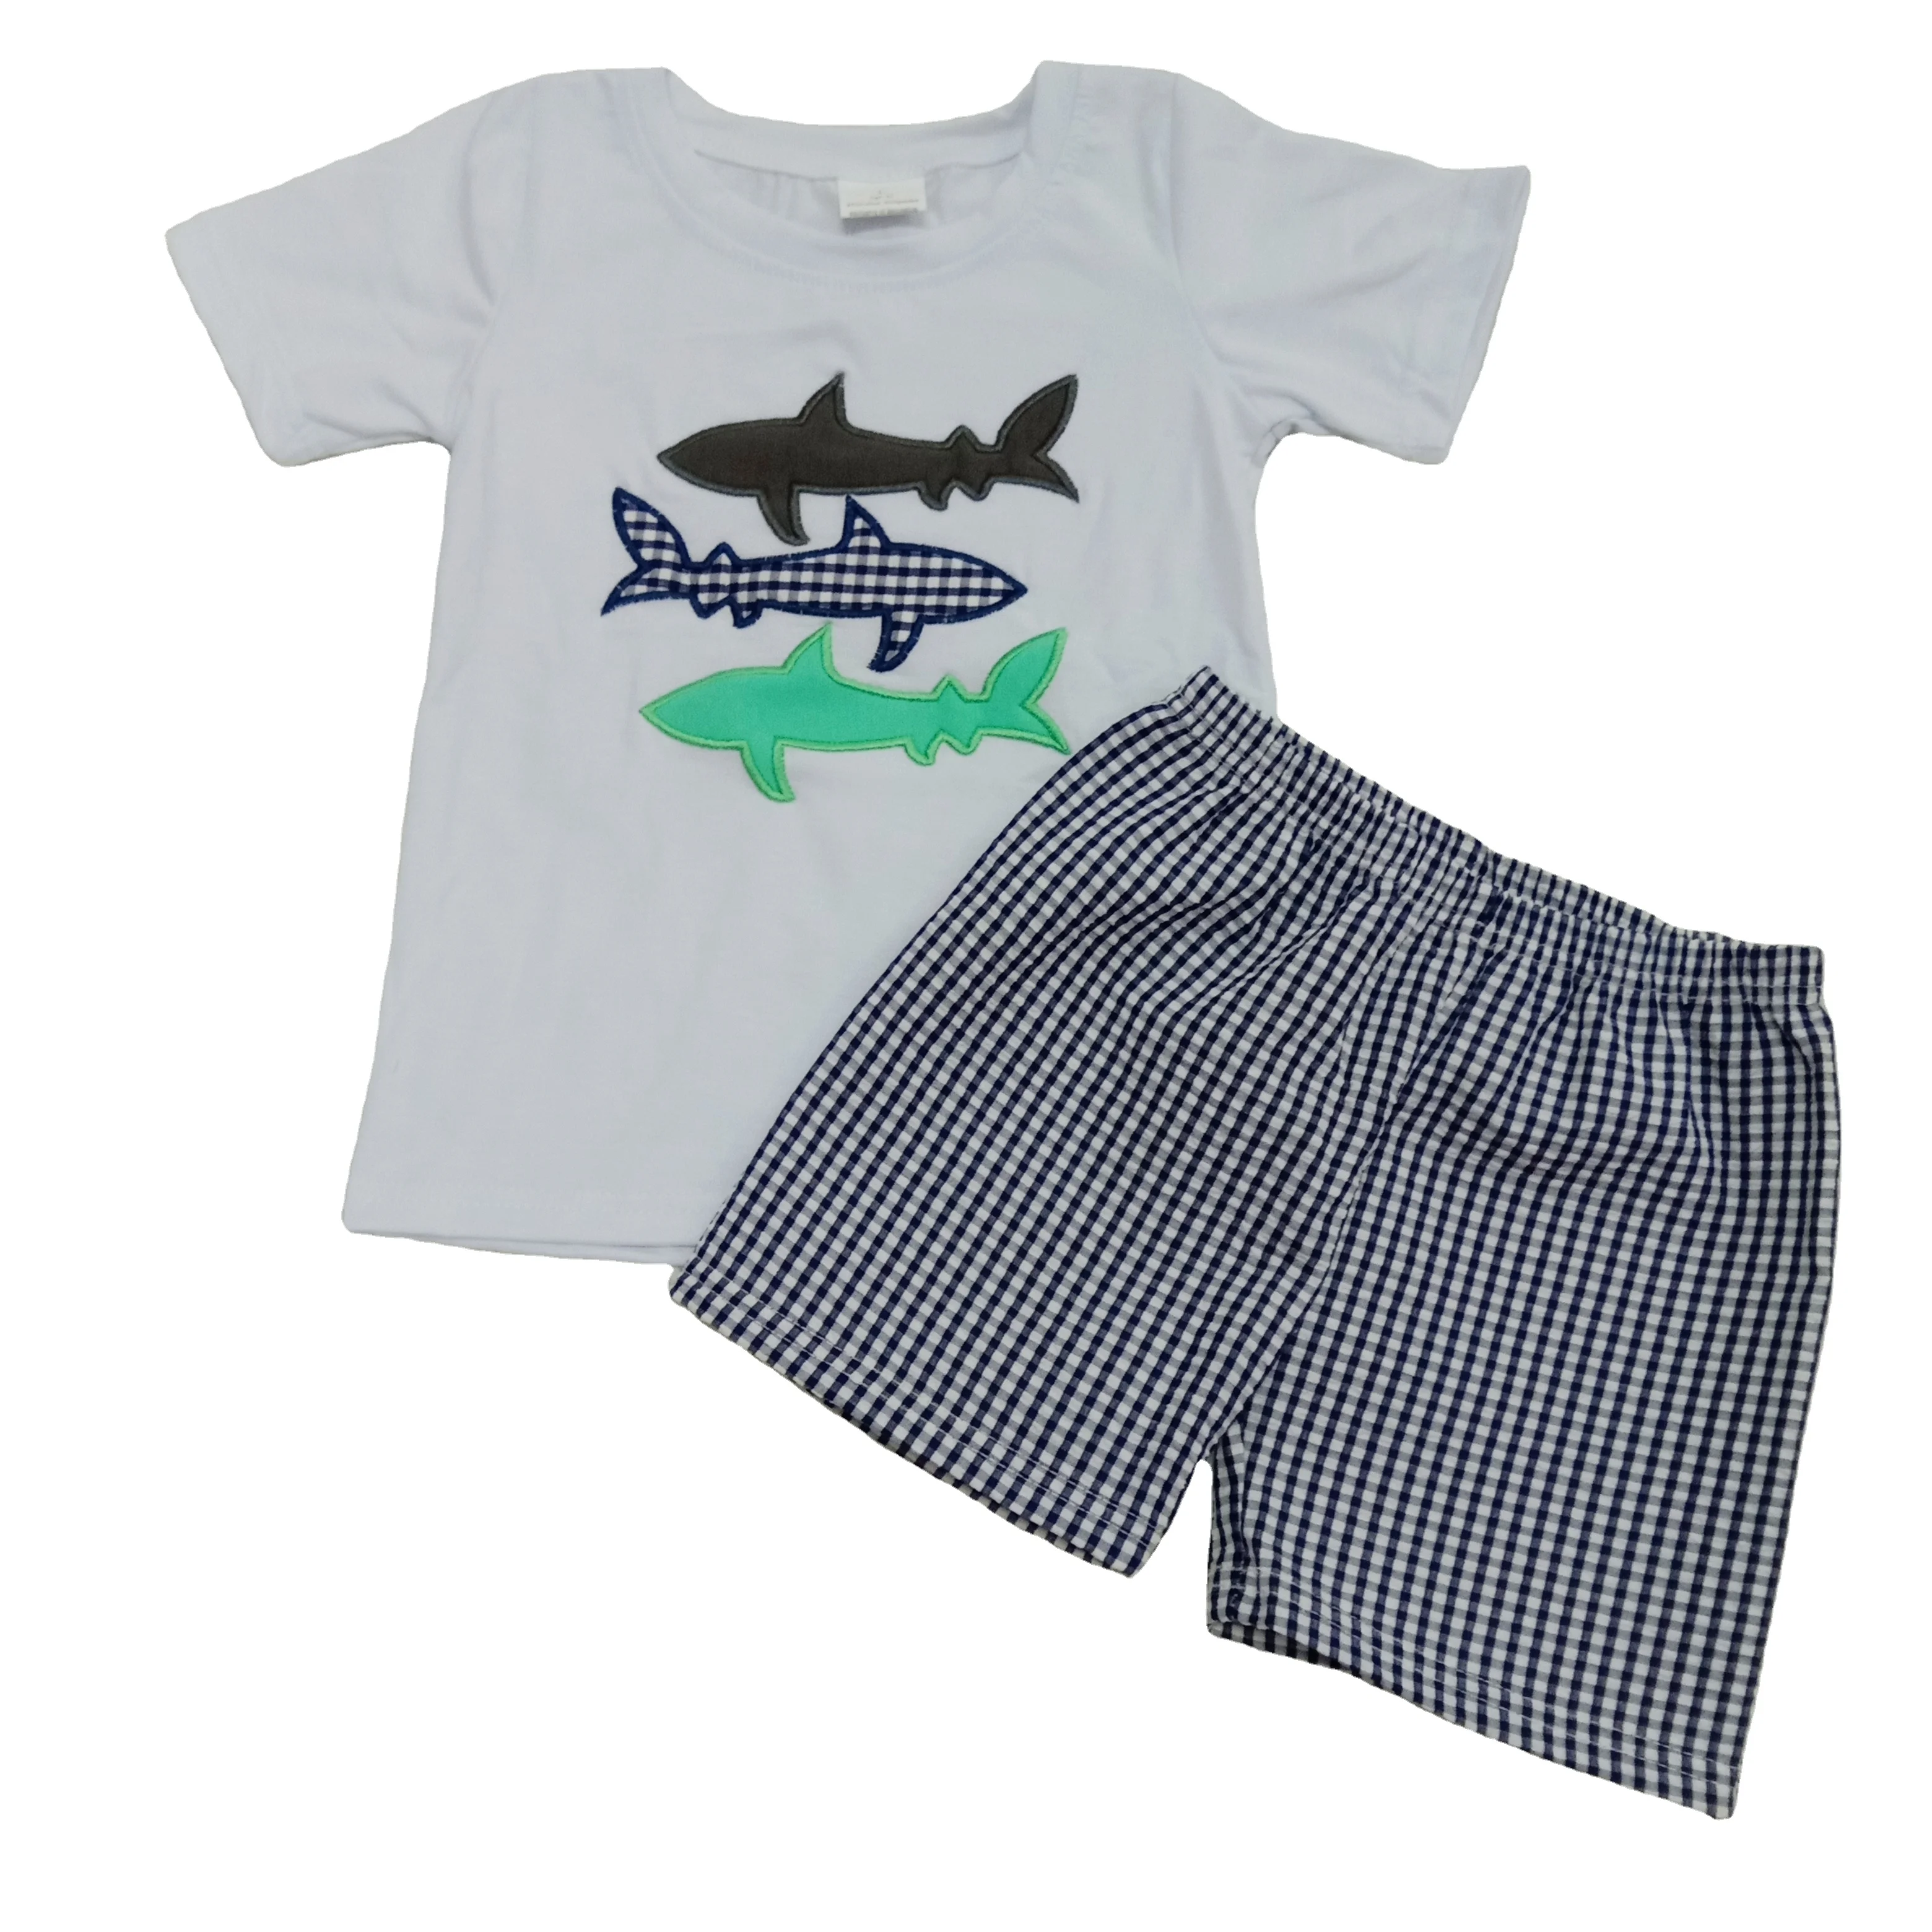 

2020 baby boys boutique clothing fashion shark embroidery top Seersucker fabric shorts children cute summer sets kids outfits, Same as picture